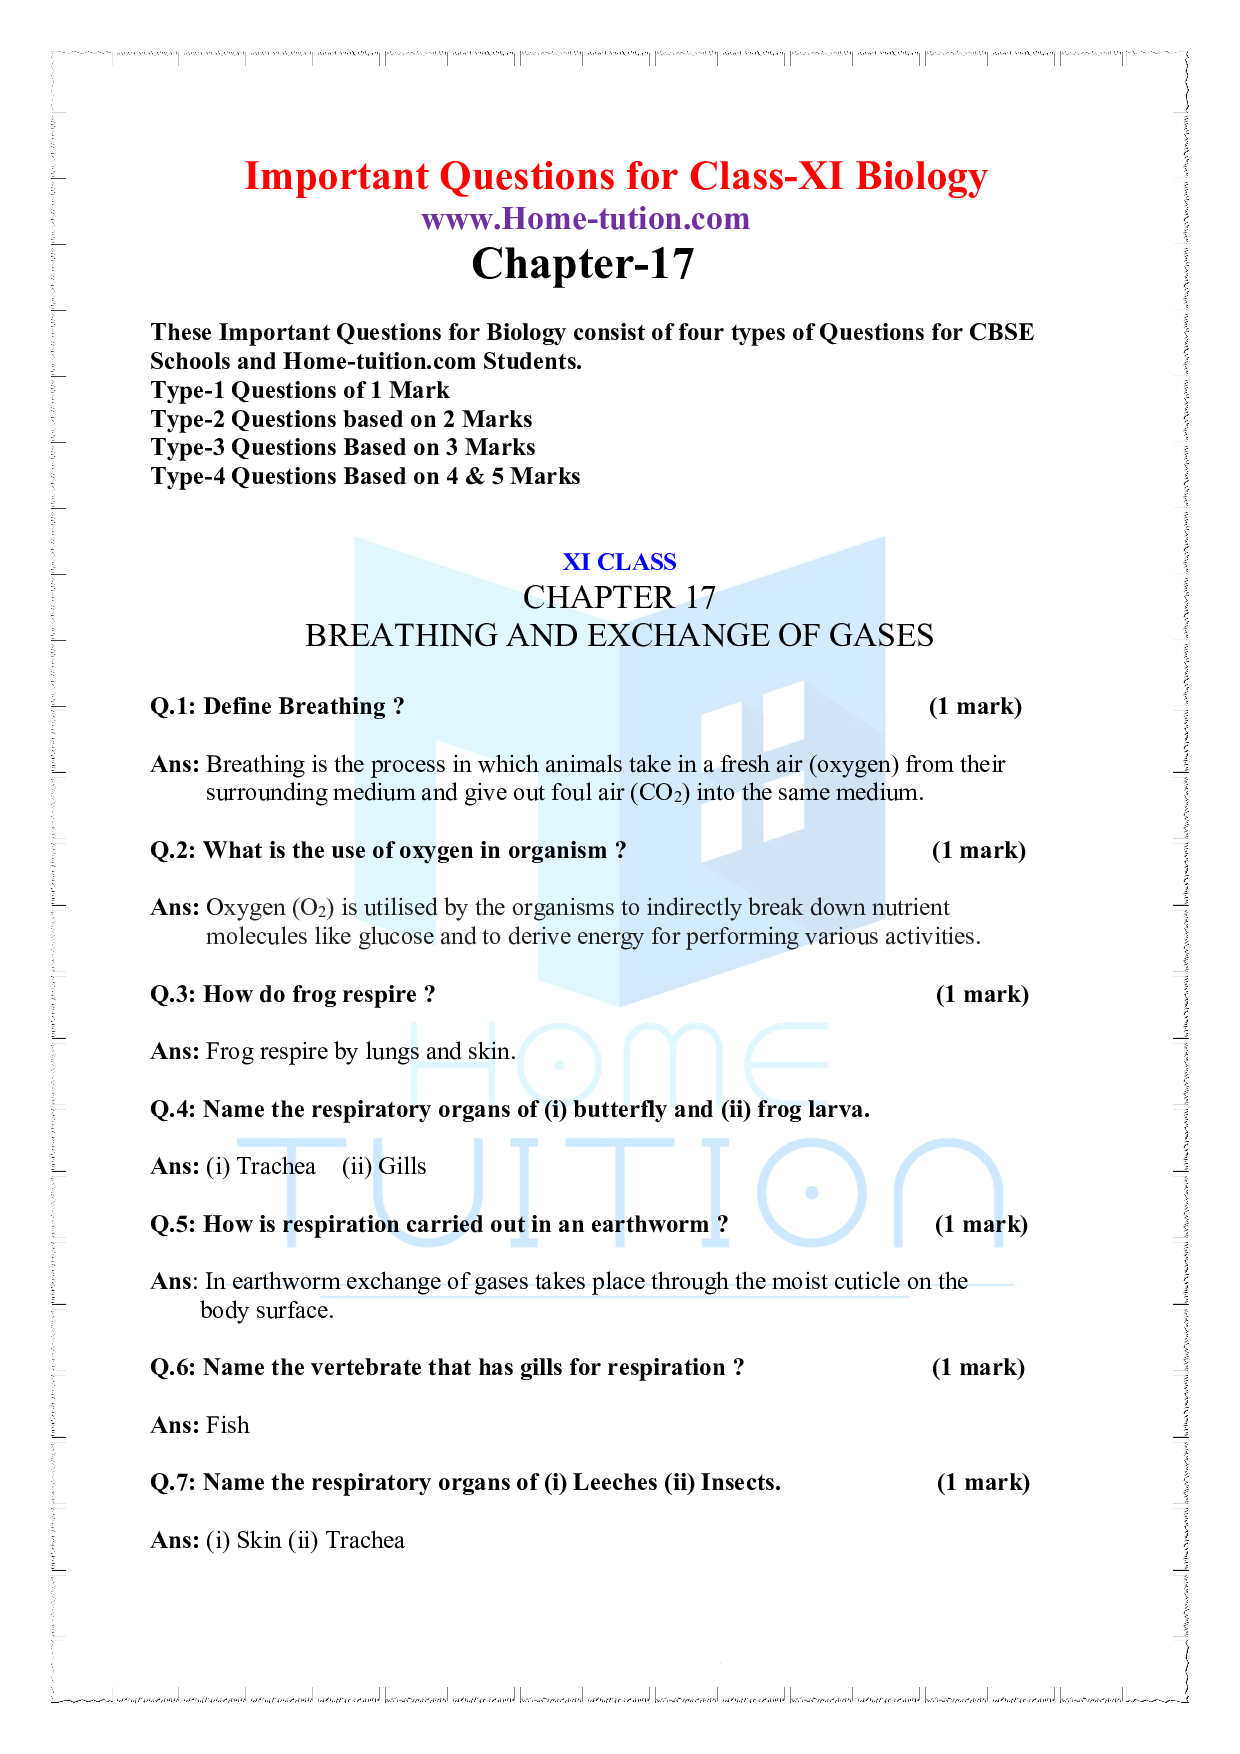 Chapter 17 Breathing and Exchange of Gases Important Questions